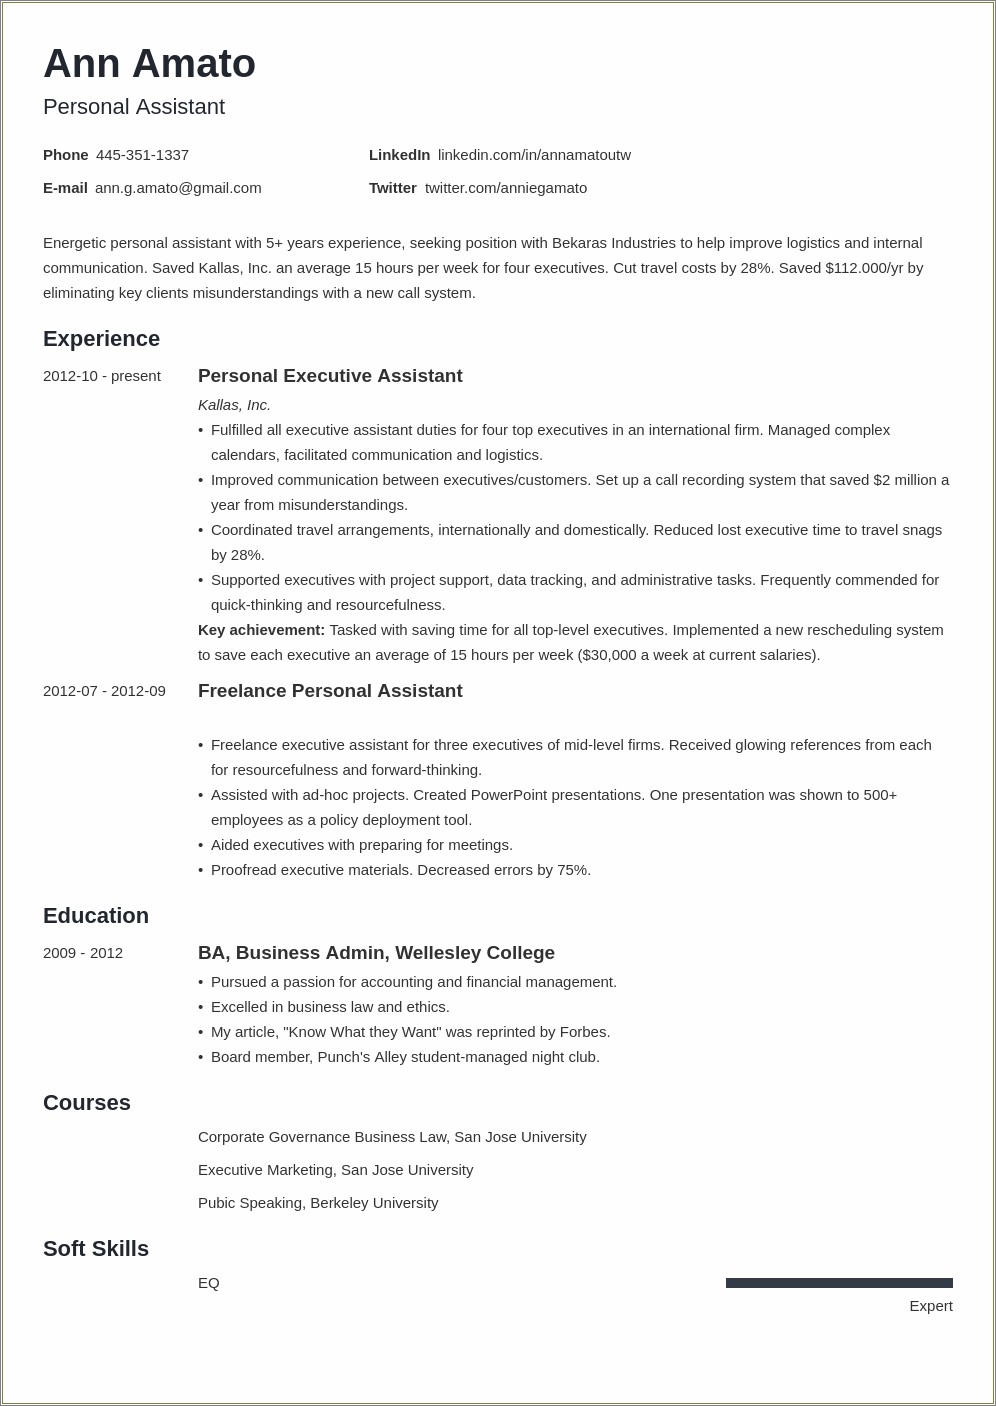 1 Year Experience Resume Format Pdf